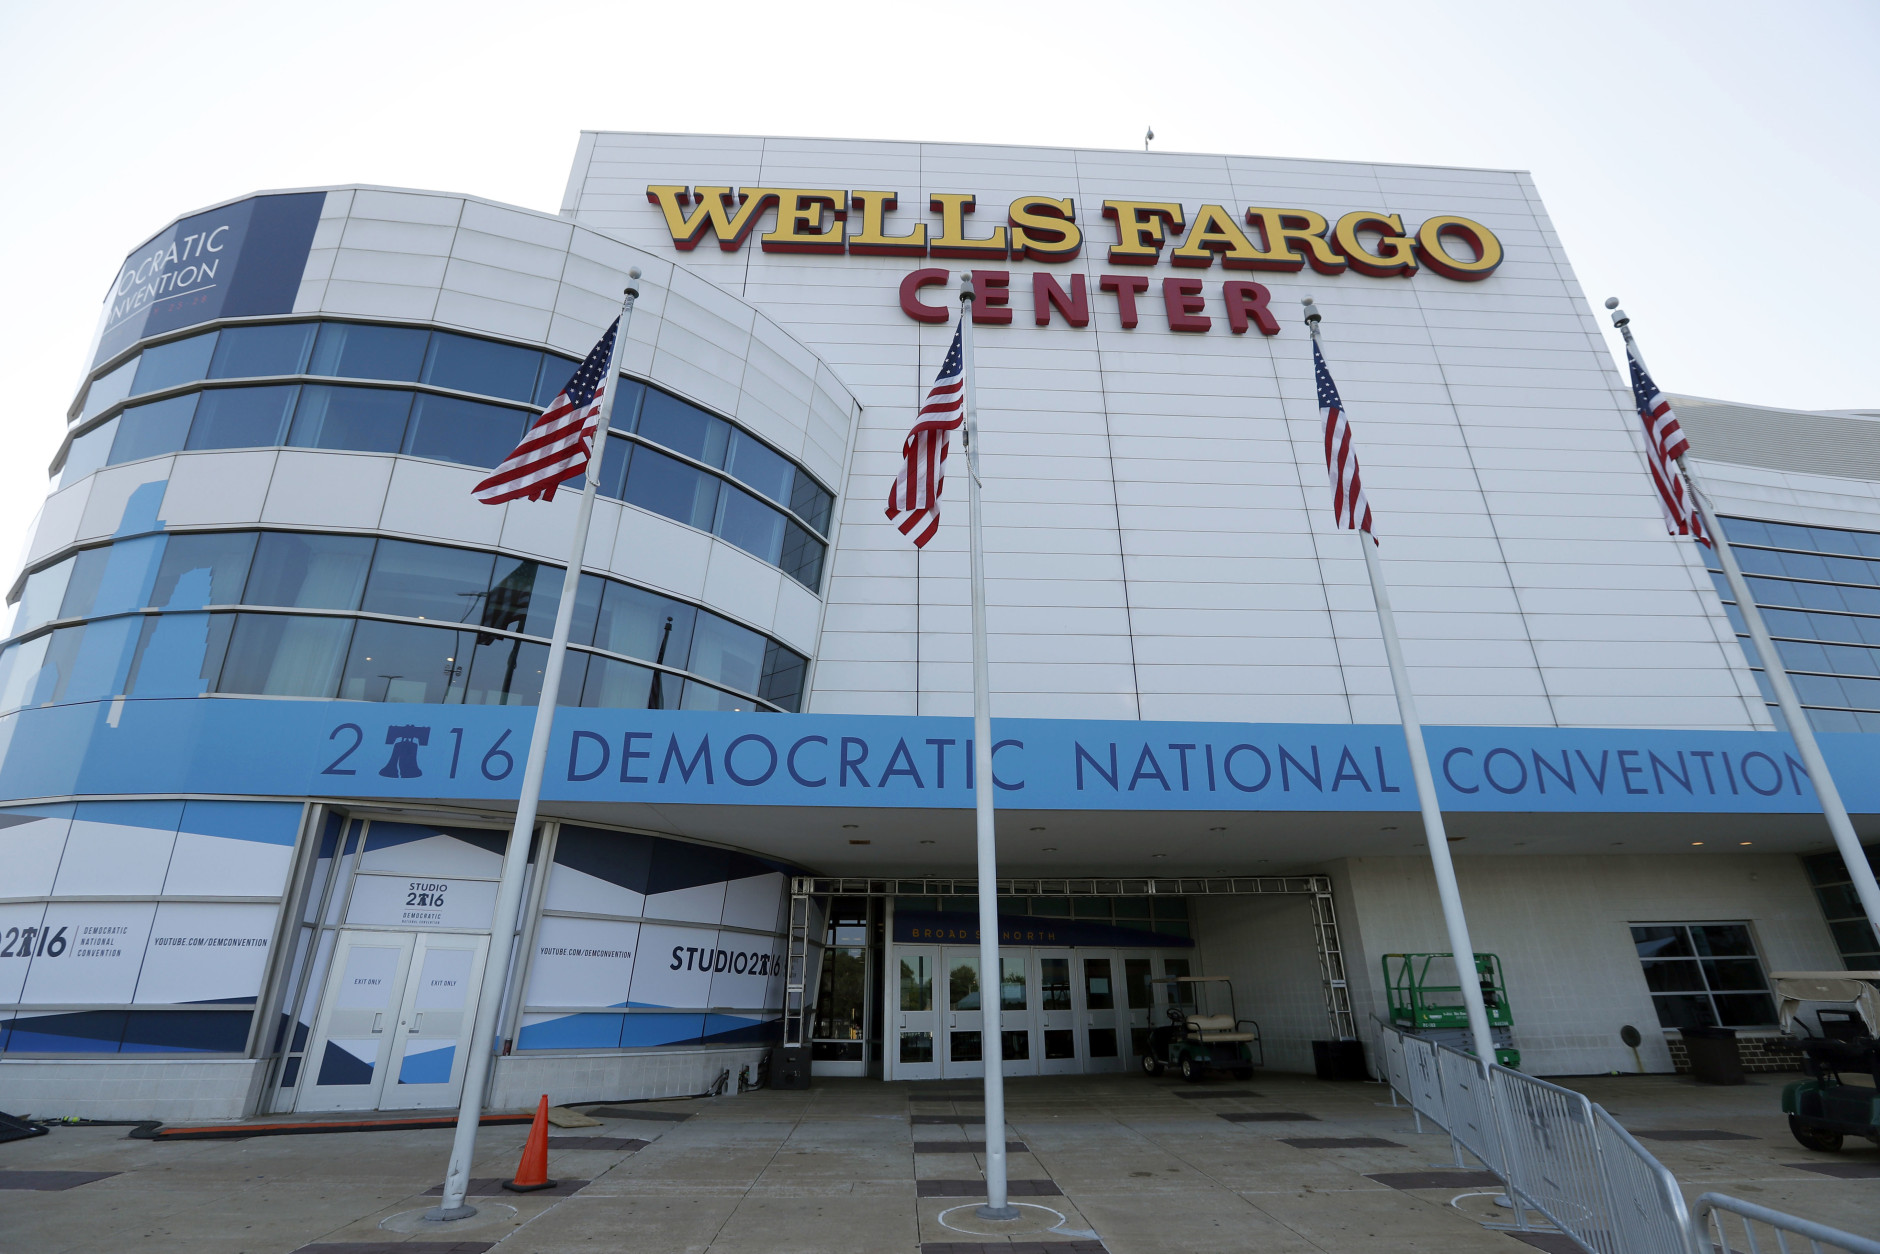 The outside of the Well Fargo Center is seen before the Democratic National Convention, Saturday, July 23, 2016 in Philadelphia. (AP Photo/Alex Brandon)